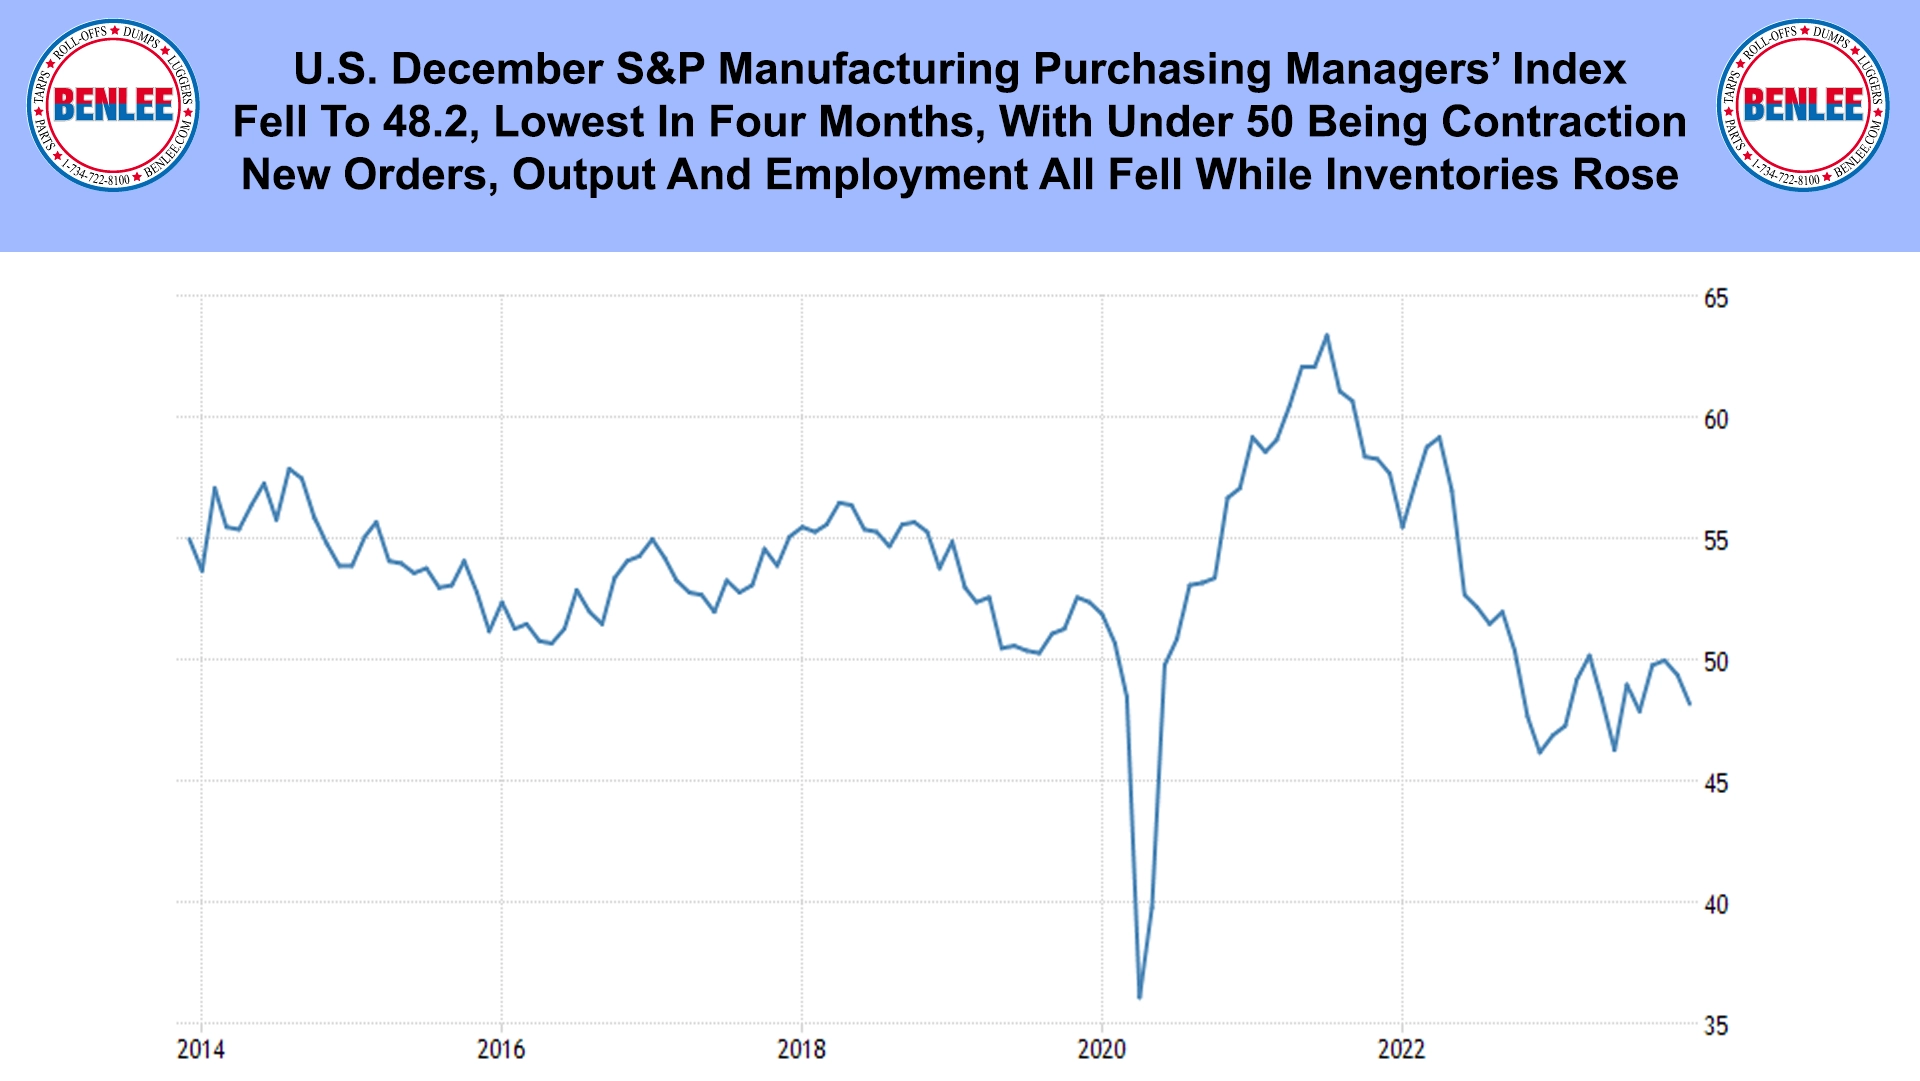 U.S. December S&P Manufacturing Purchasing Managers’ Index